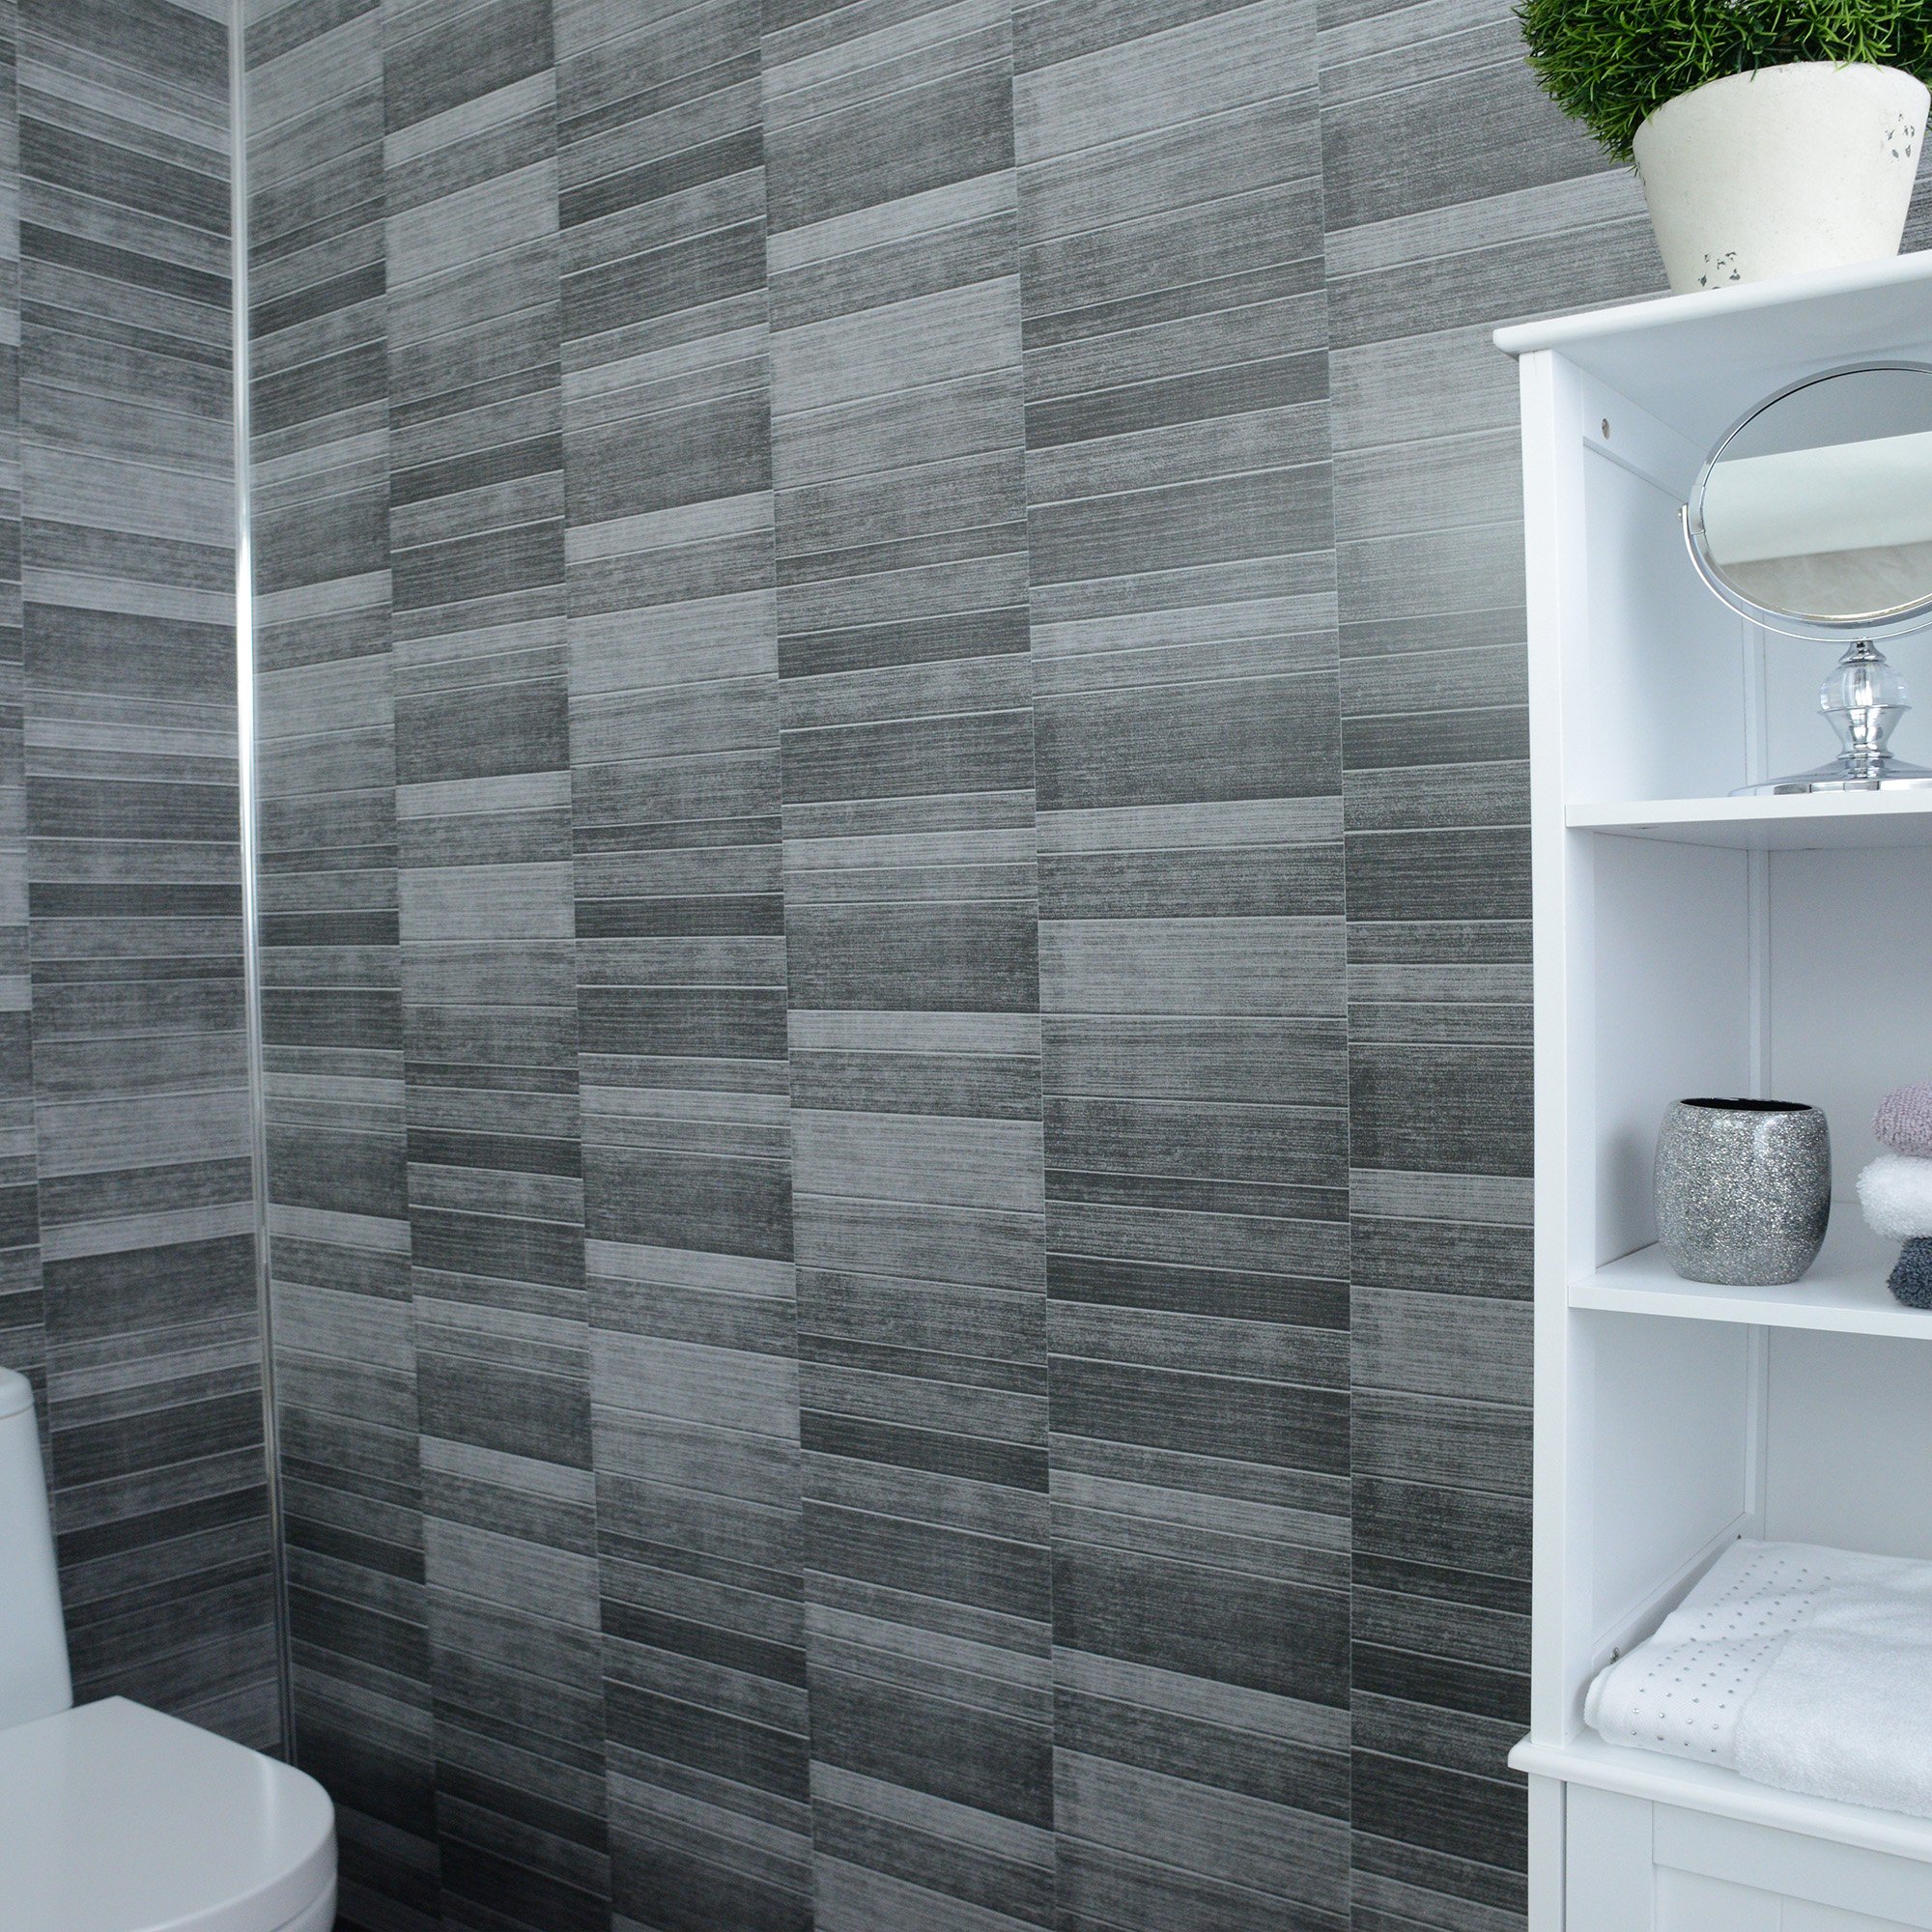 Improving the Outlook of Your Bathrooms with Wet Wall Panels?